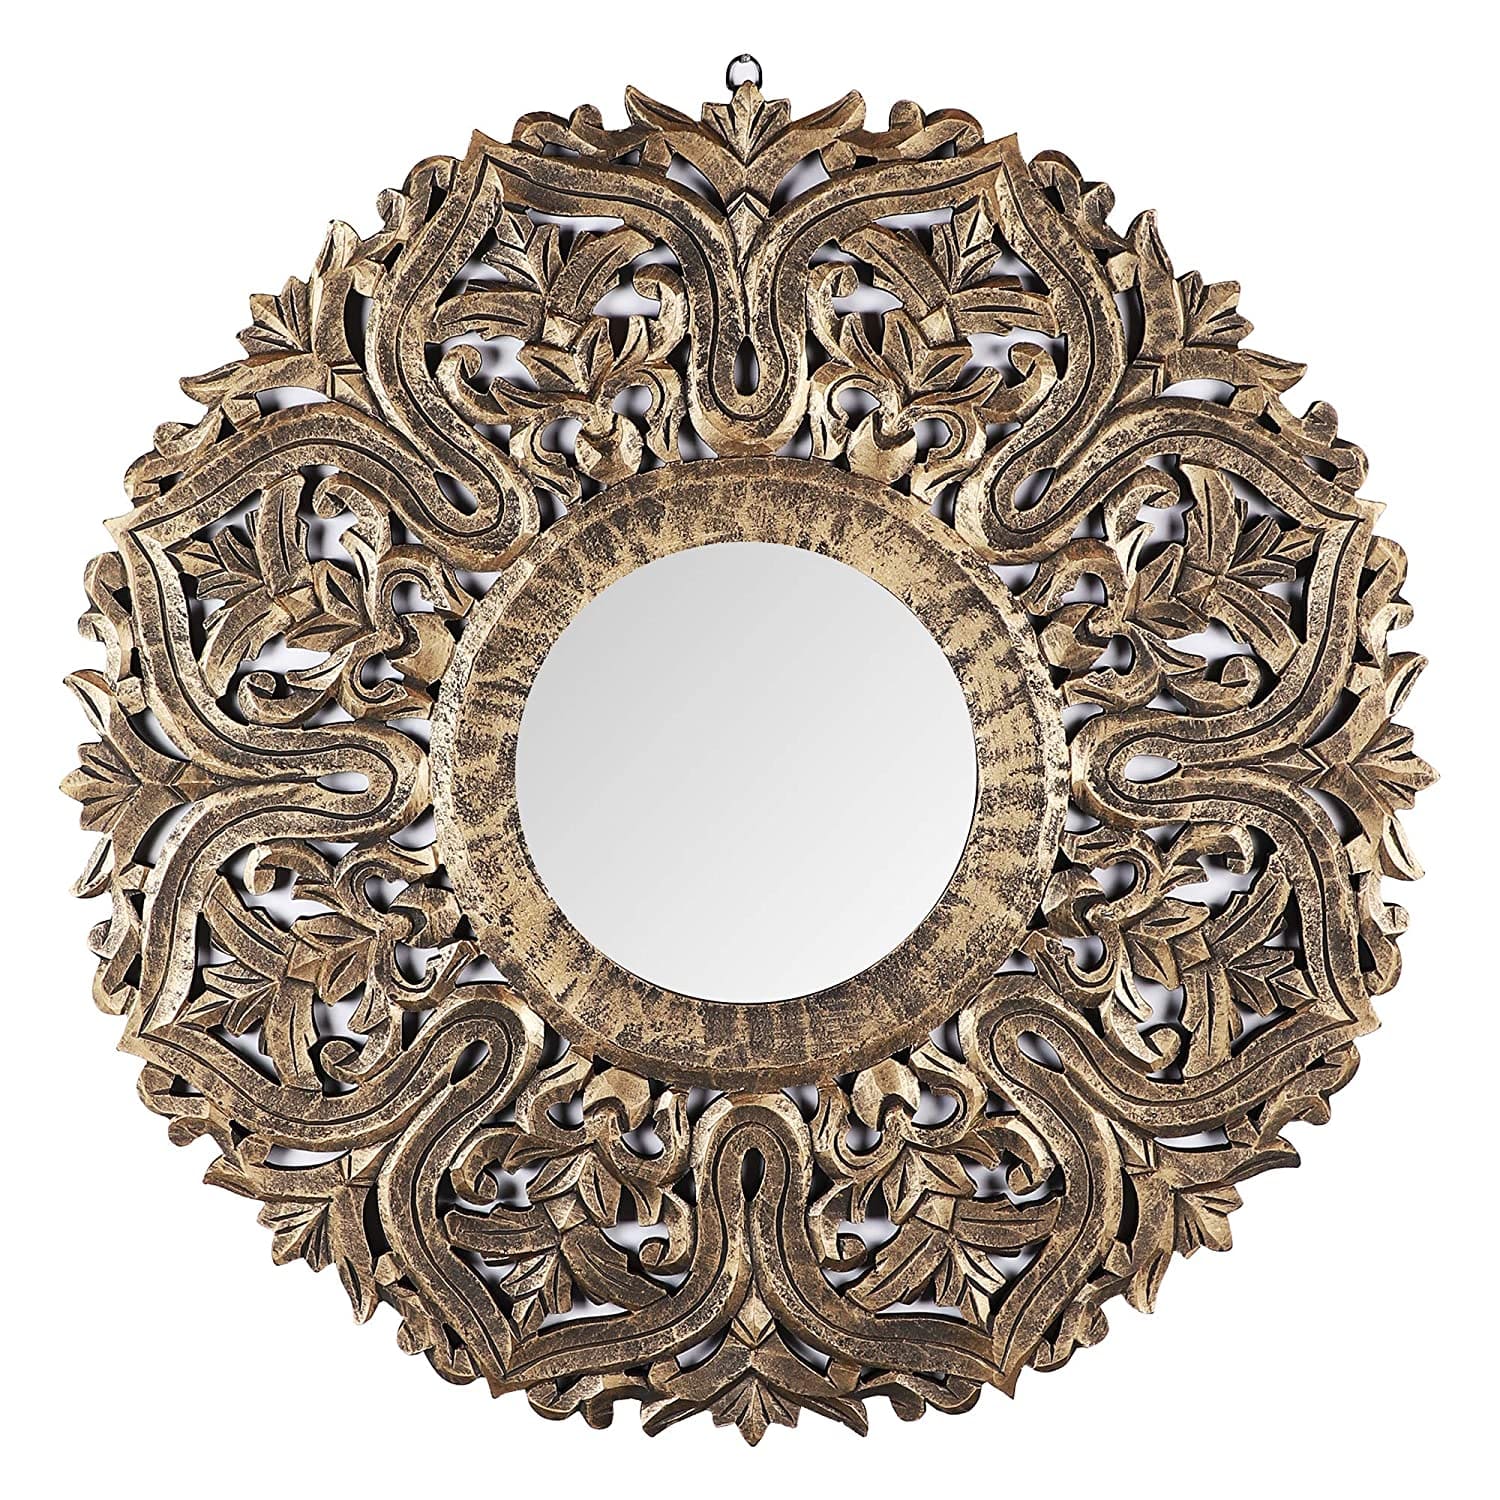 Decorative Hand Crafted Wooden Mirror Frame in Antique Gold Finish (30 x 30 Inch),